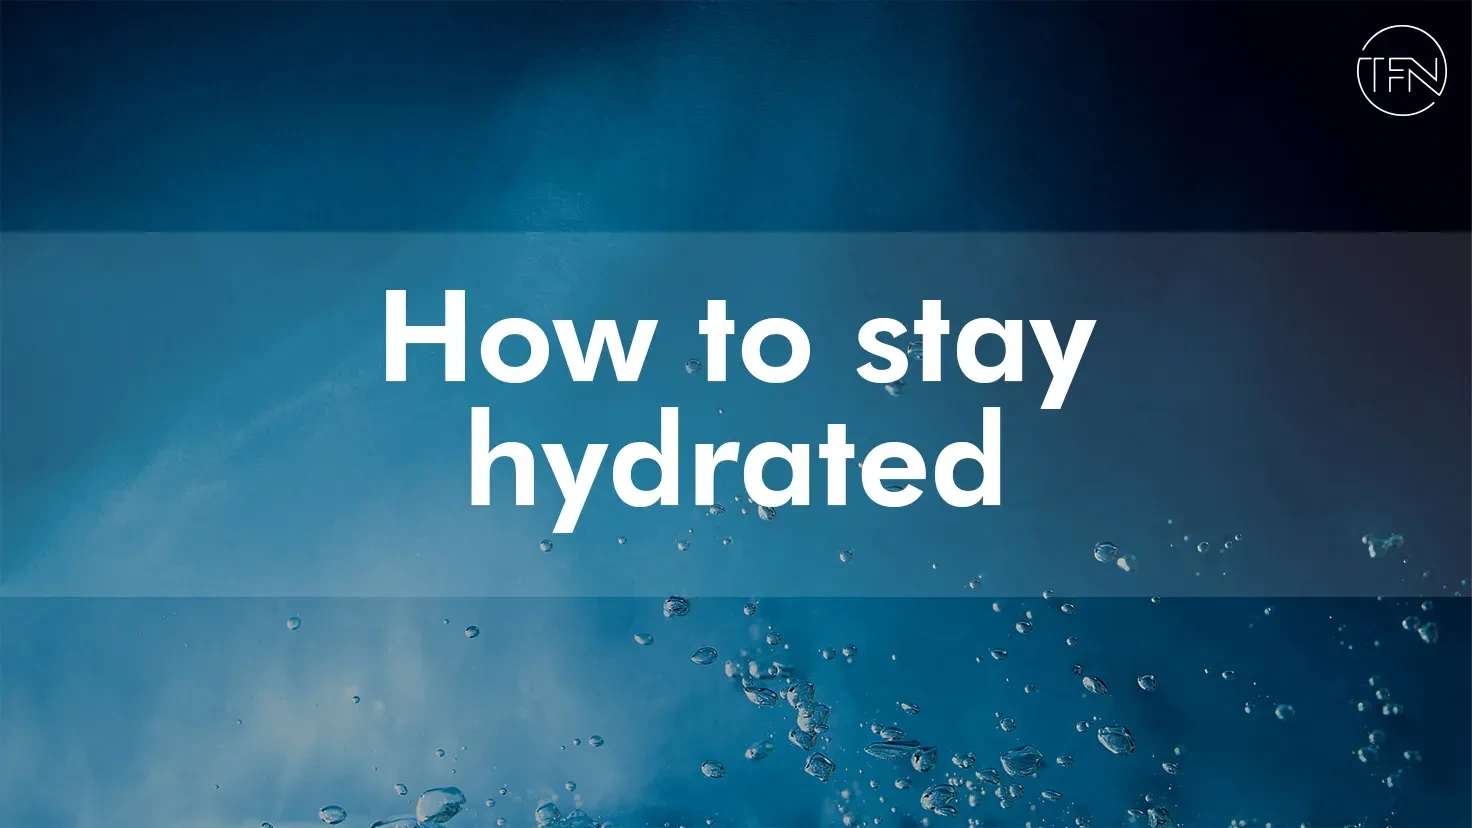 How to stay hydrated